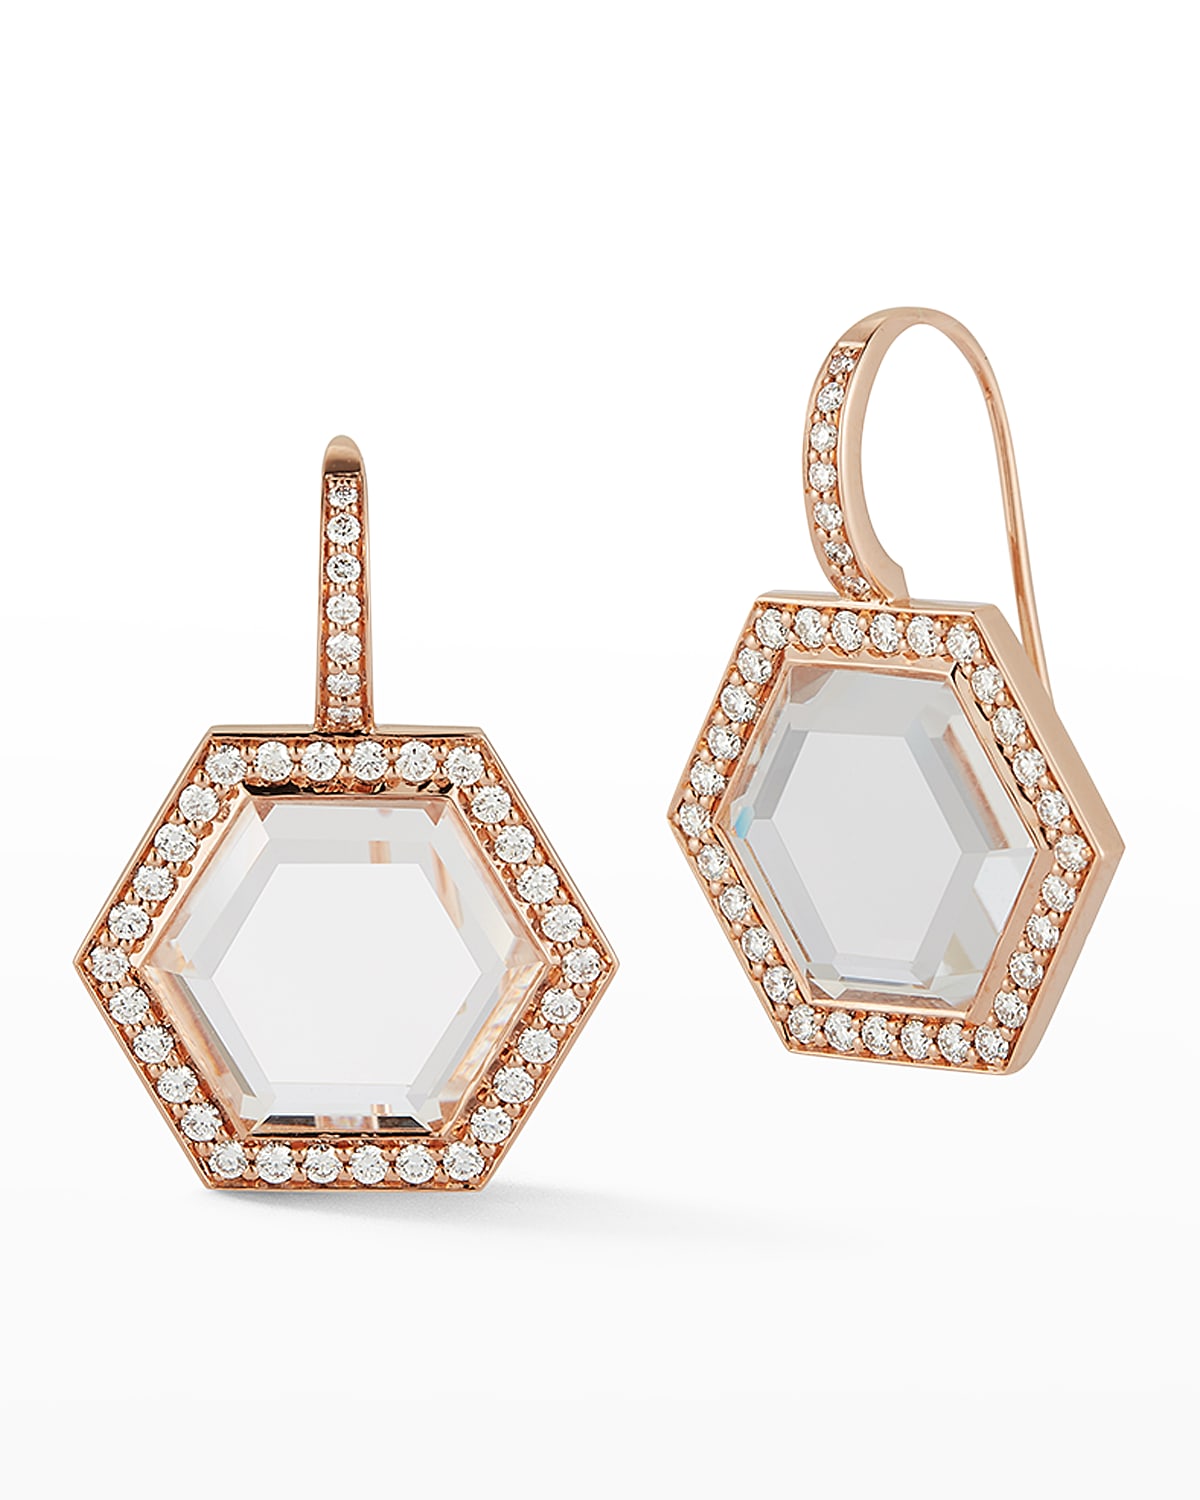 WALTERS FAITH BELL ROSE GOLD ROCK CRYSTAL HEXAGONAL WIRE EARRINGS WITH DIAMOND BORDER